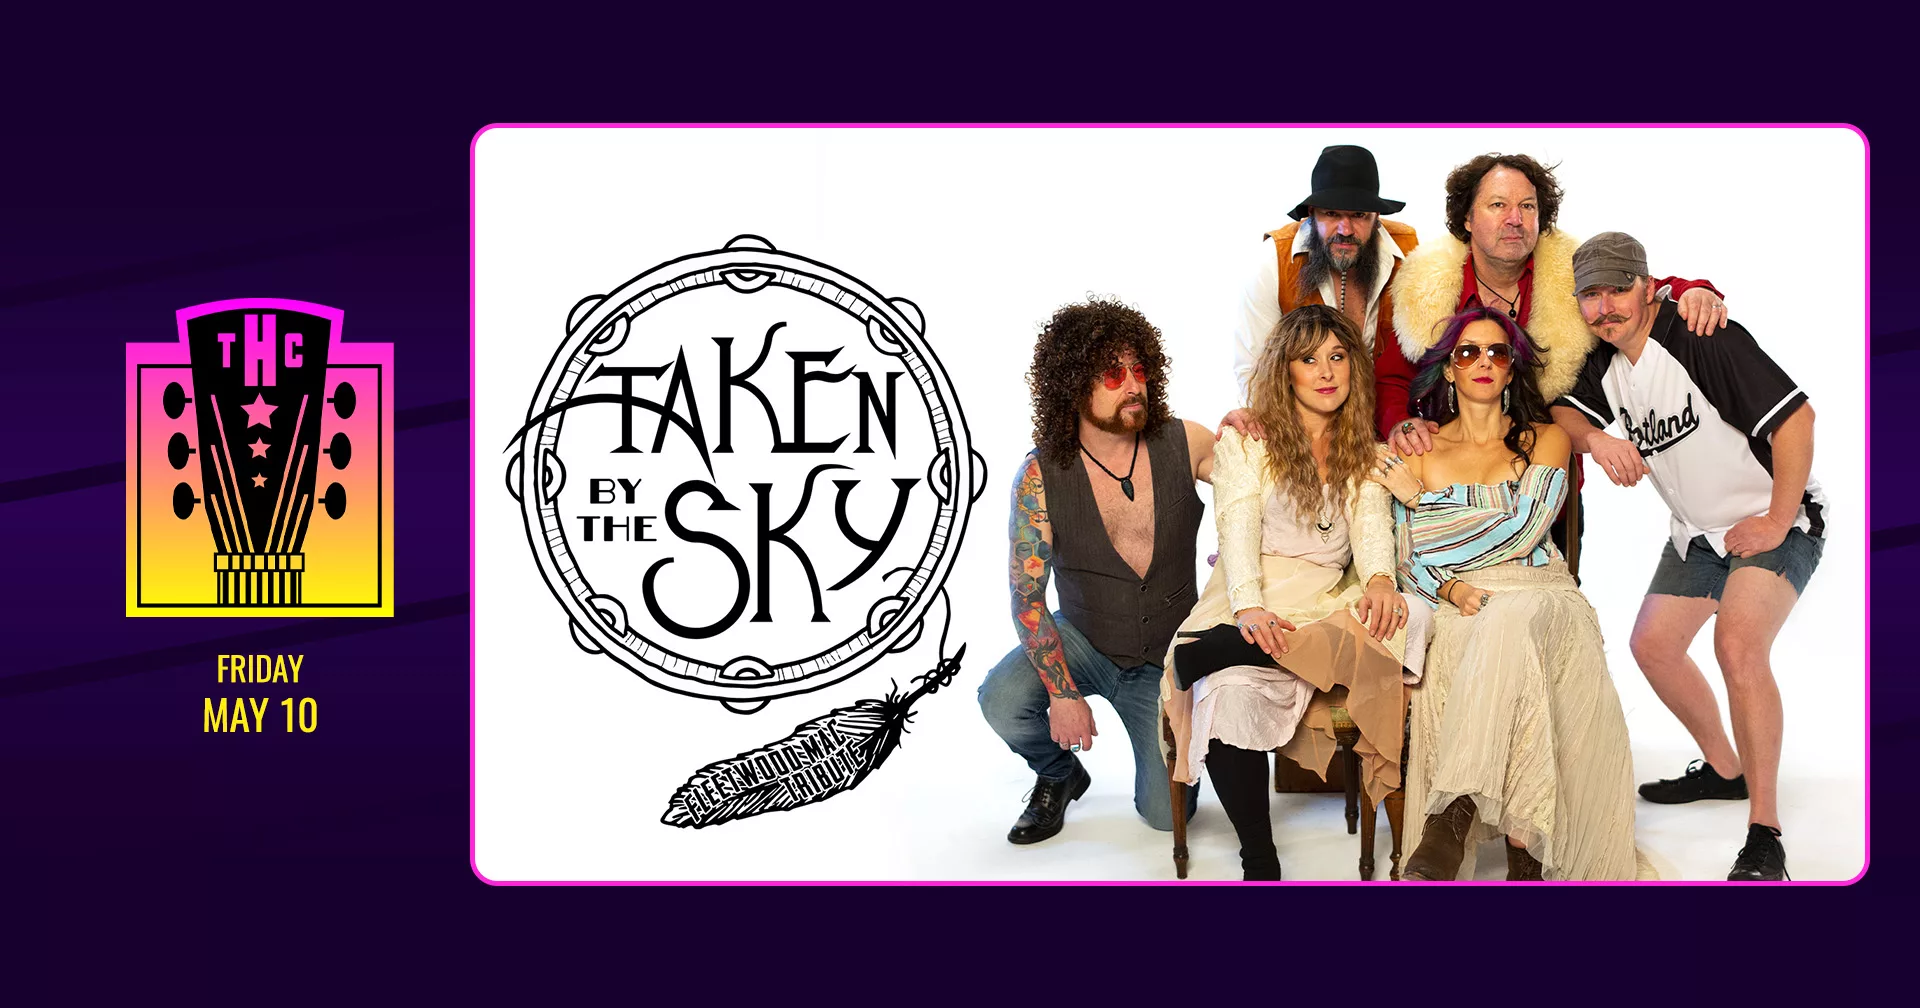 taken by the sky fleetwood mac tribute at the headliners club